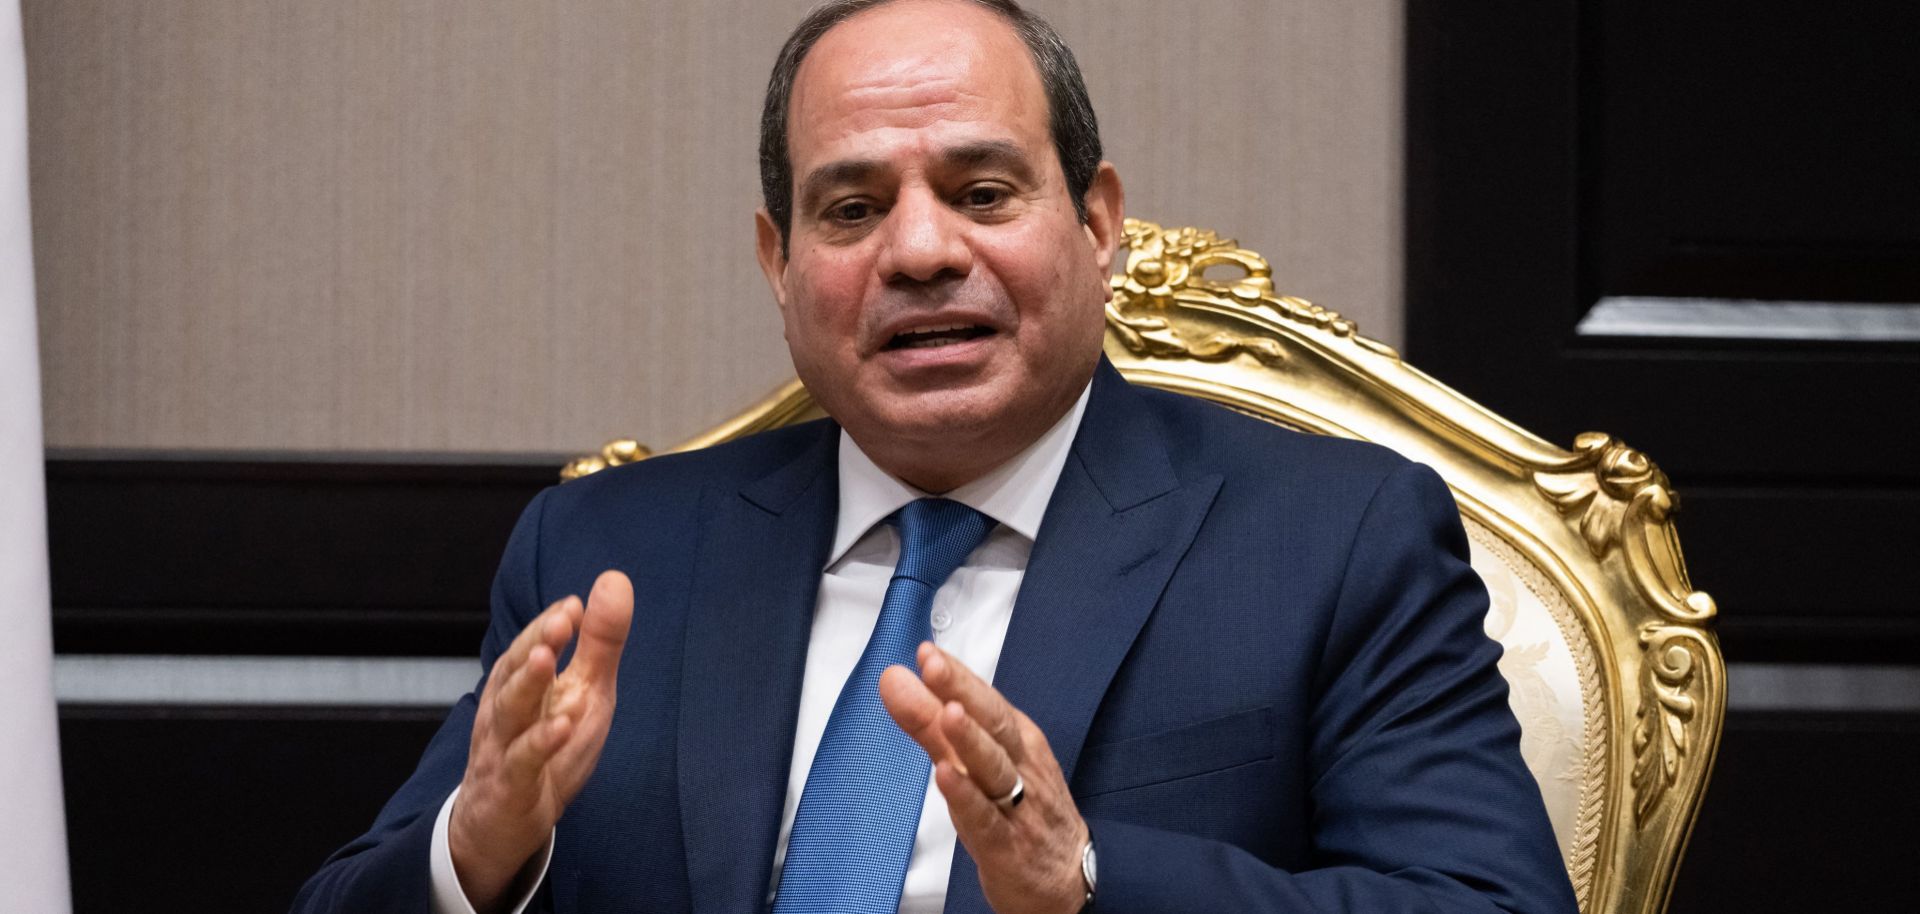 Egyptian President Abdel Fattah al-Sisi is seen on the sidelines of the COP27 summit on Nov. 11, 2022.